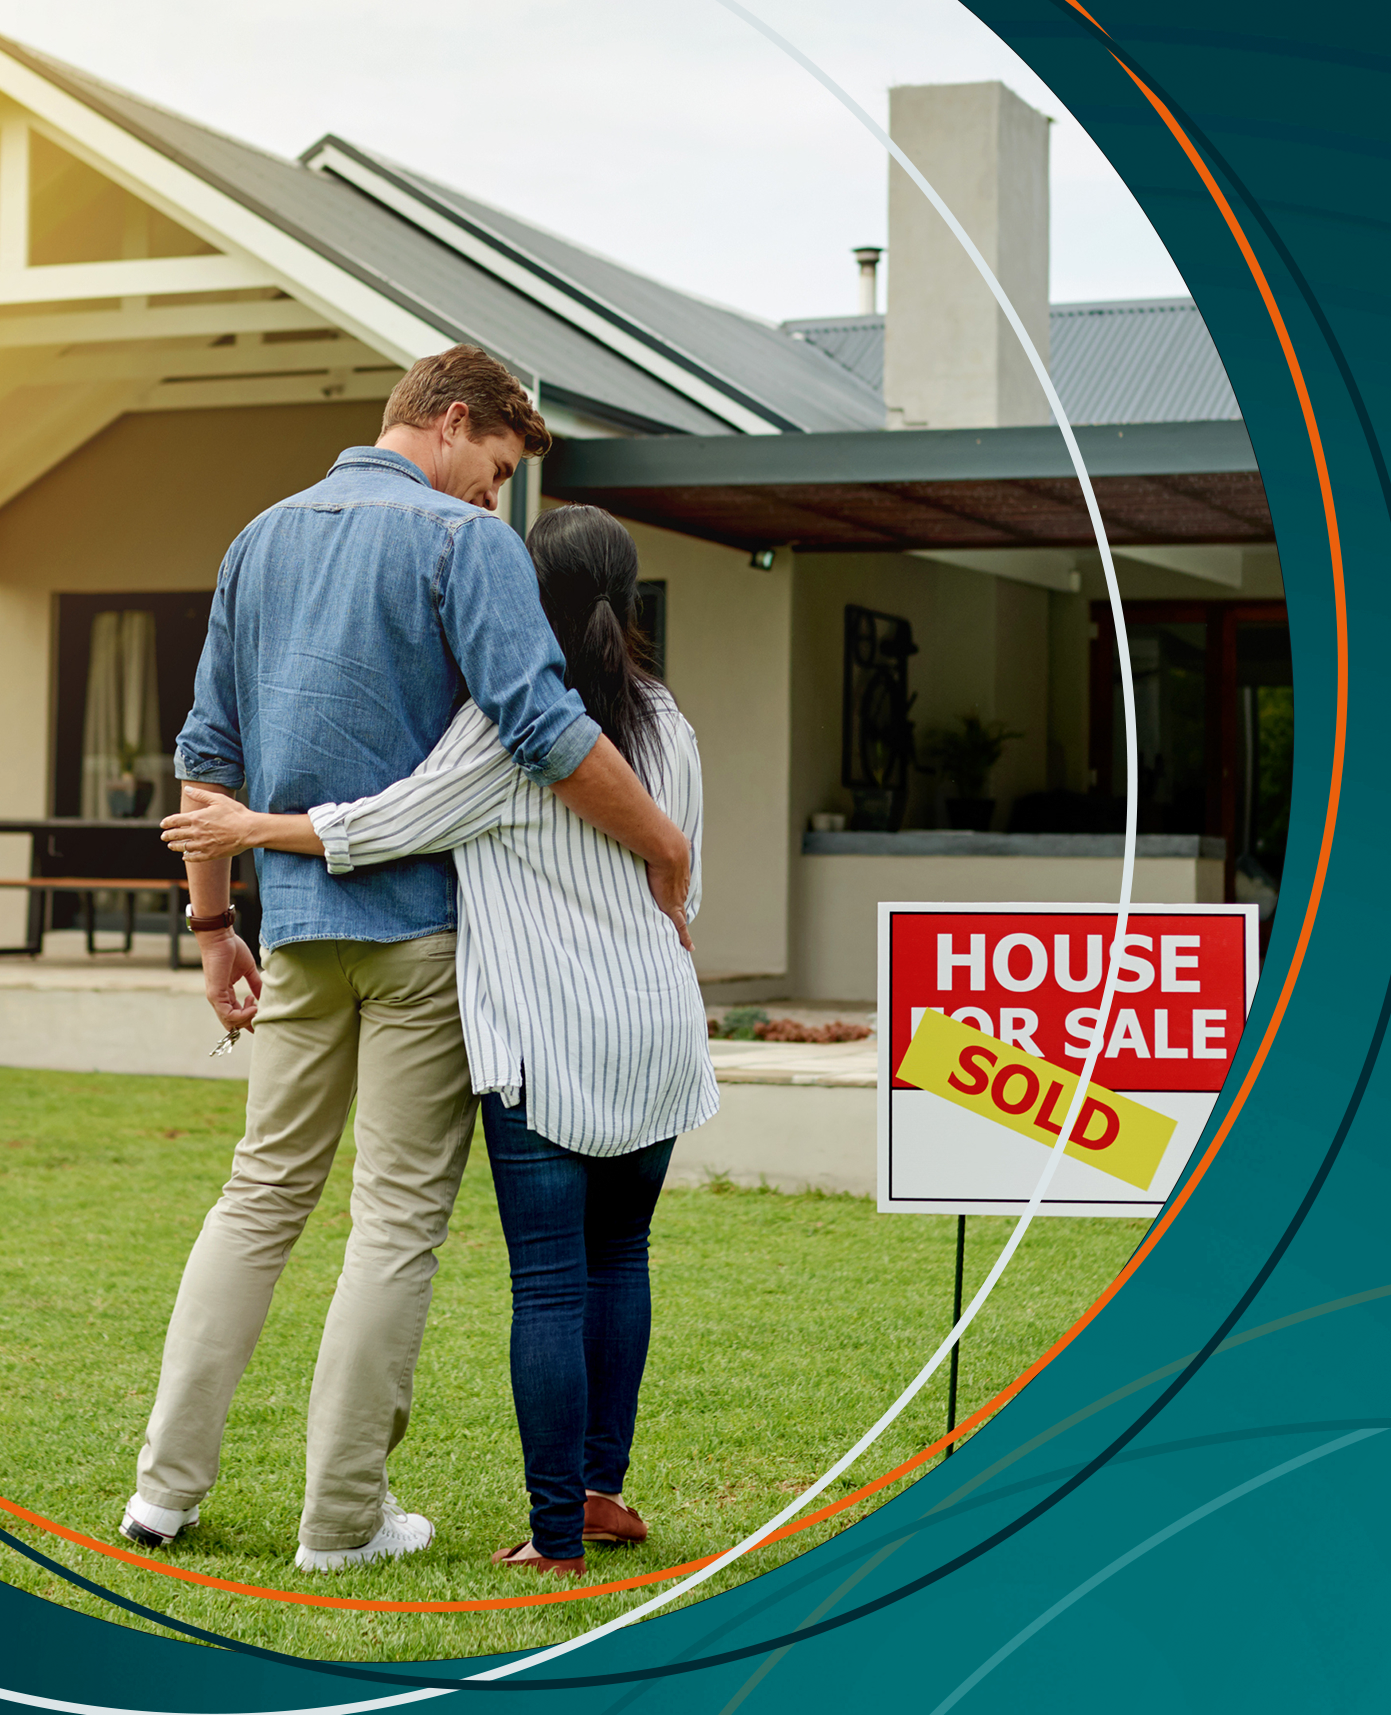 Image of couple standing in front of house with "Sold" sign